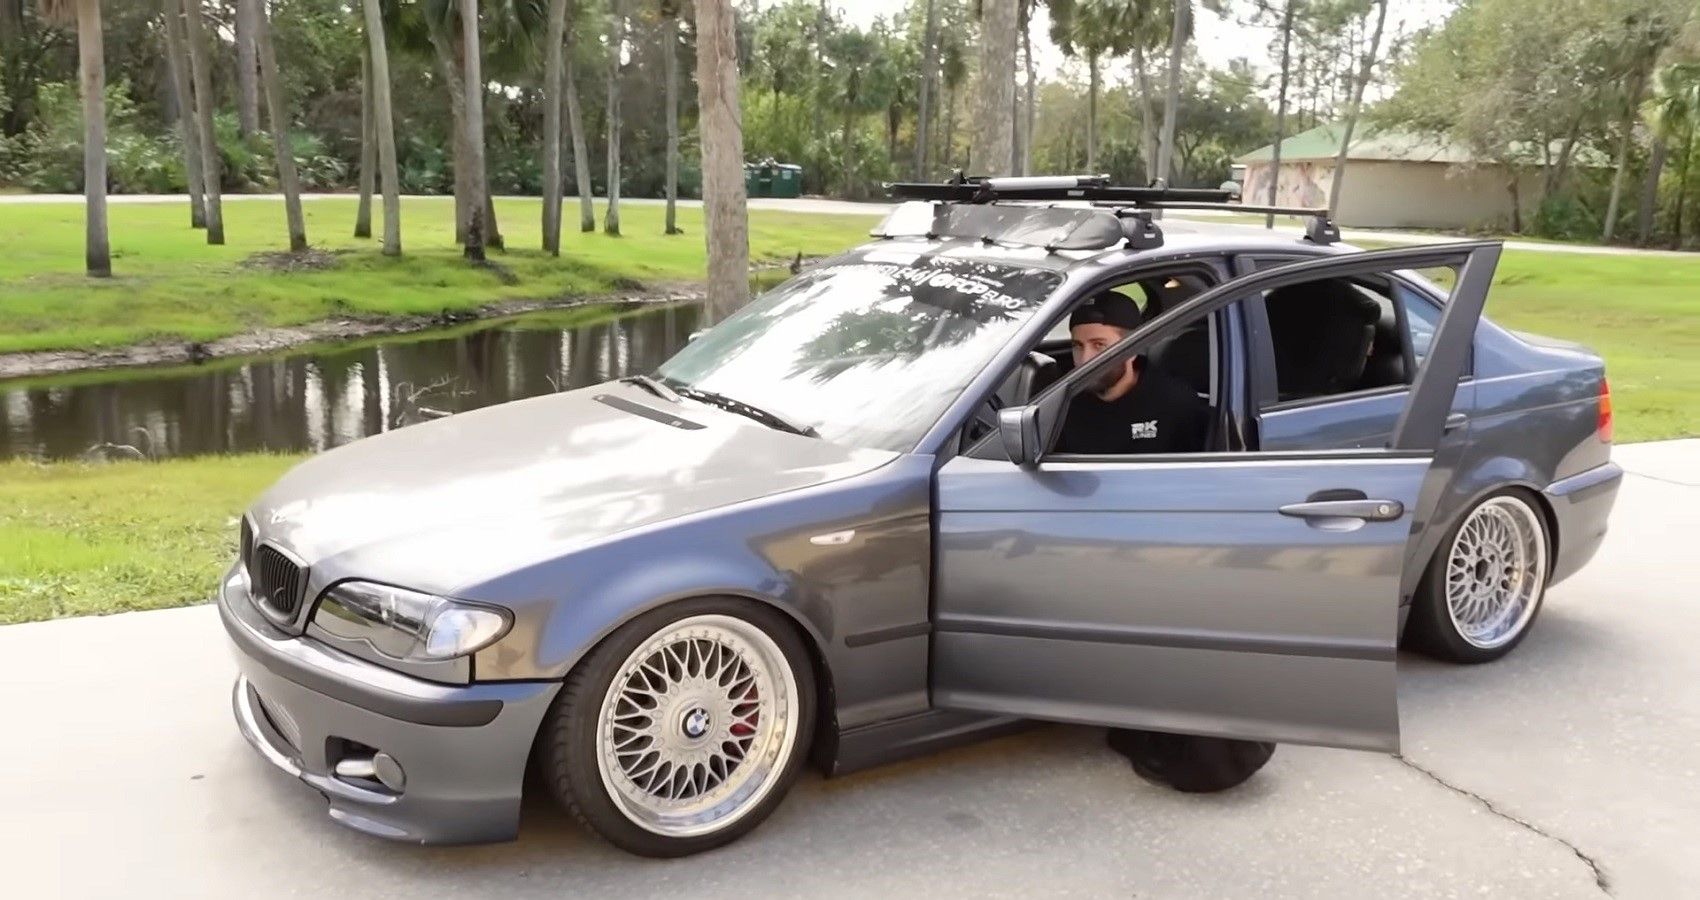 See Adam LZ Getting 3X The Power Out Of His BMW 3-Series Sleeper